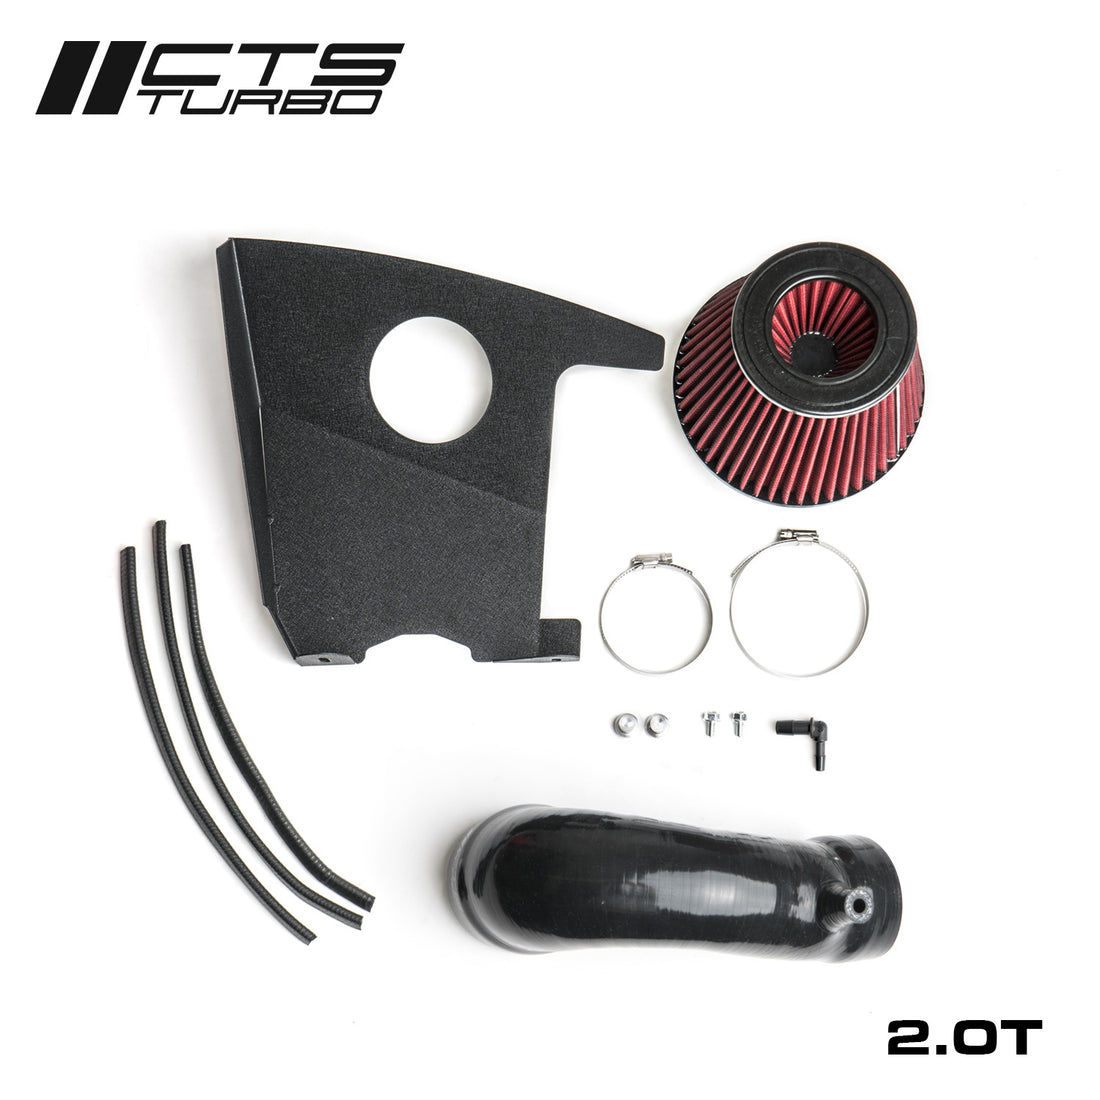 CTS TURBO B9 AUDI A4; AllRoad; A5; S4; S5; RS4 HIGH-FLOW INTAKE (6" Velocity Stack) CTS Turbo IT-290R